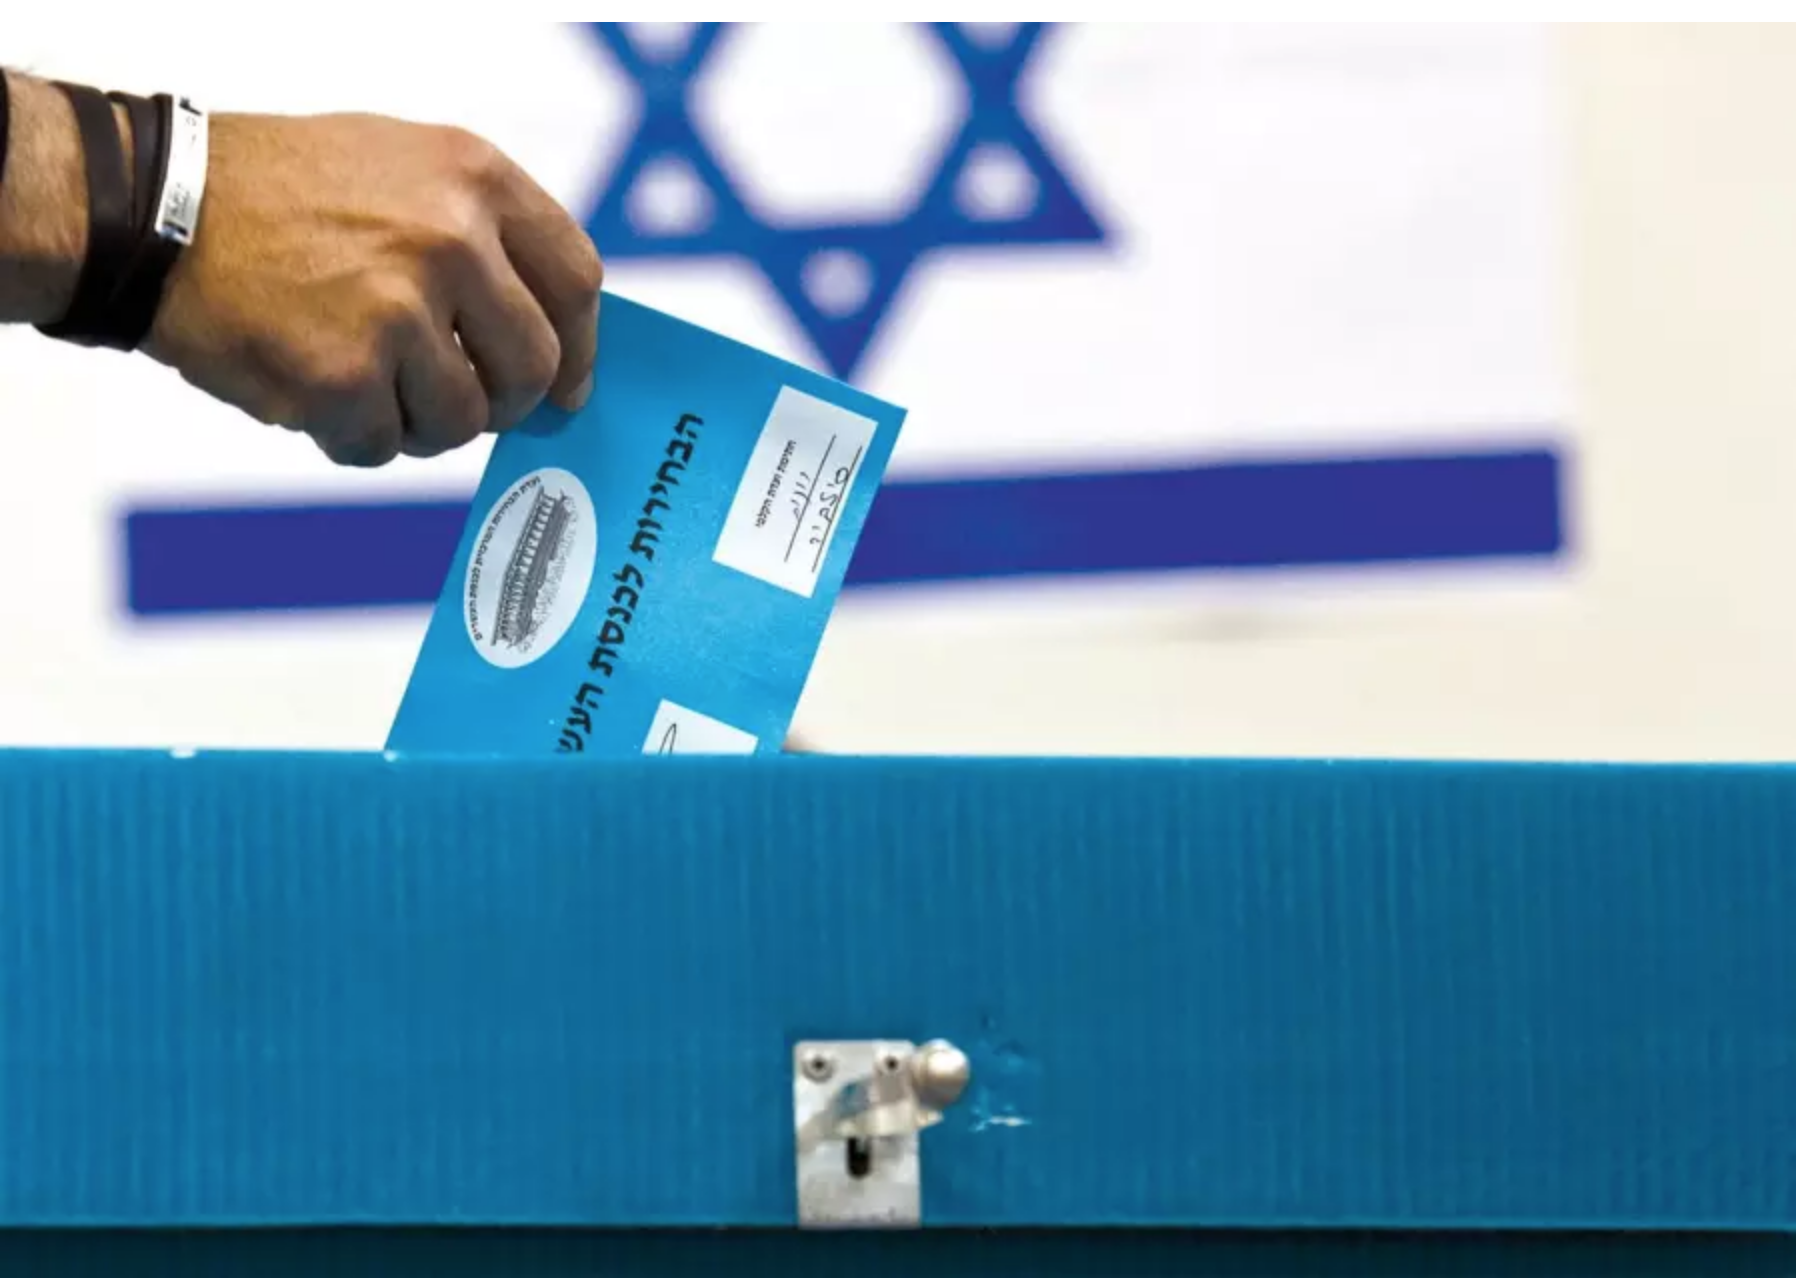 Two Weeks to Election Day: IDI Poll Reveals Jewish Israelis are in Favor of a Unity Government